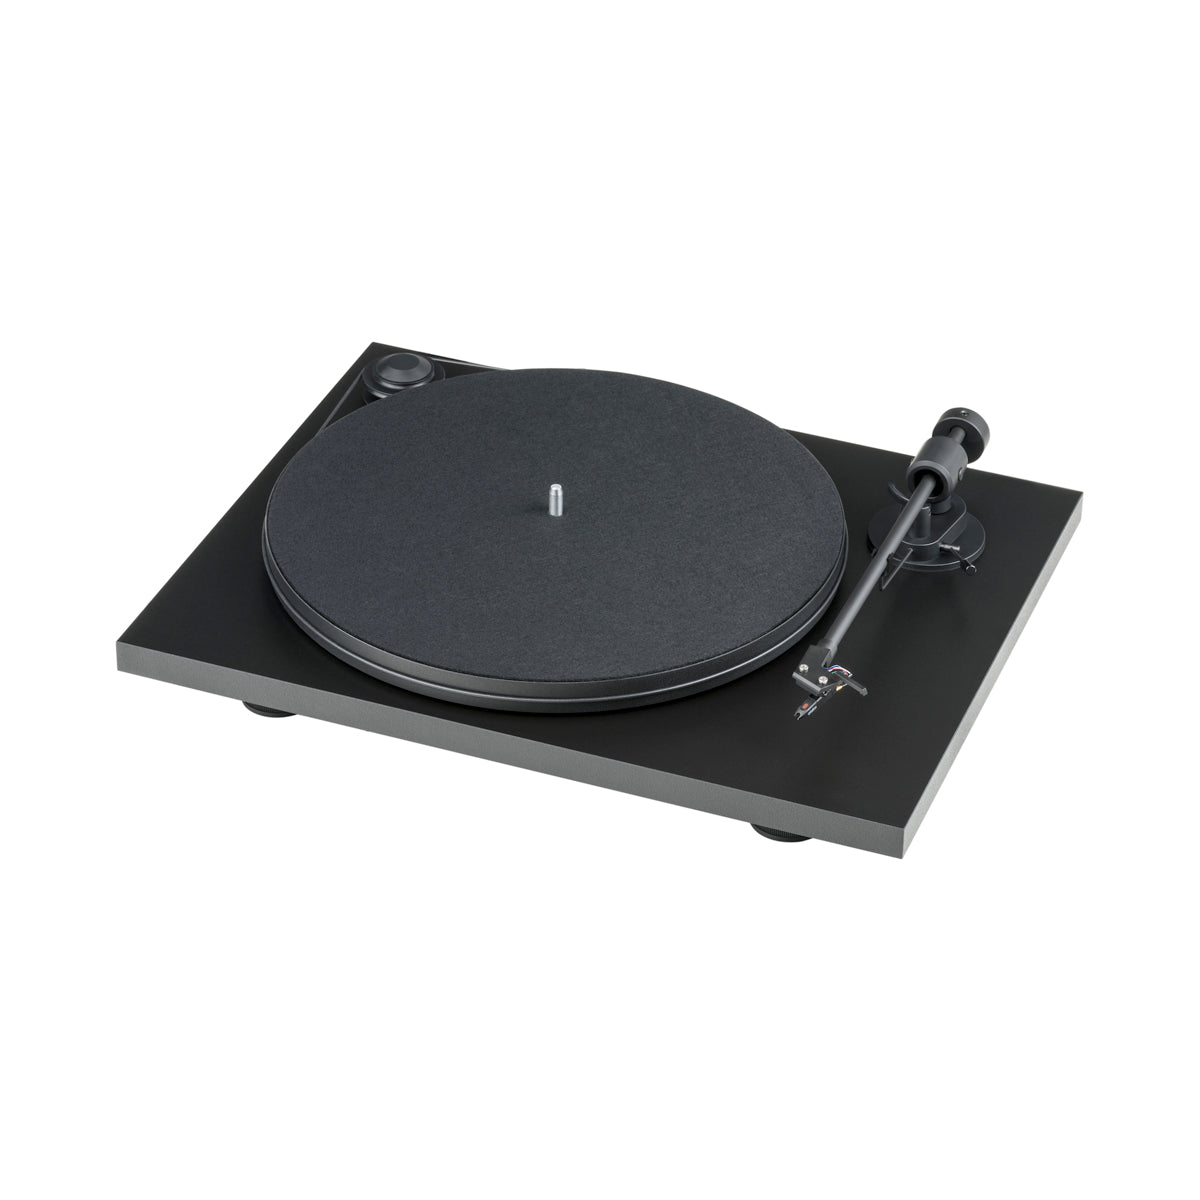 Pro-Ject Primary E Turntable with OM Cartridge - Matt Black - The Audio Experts